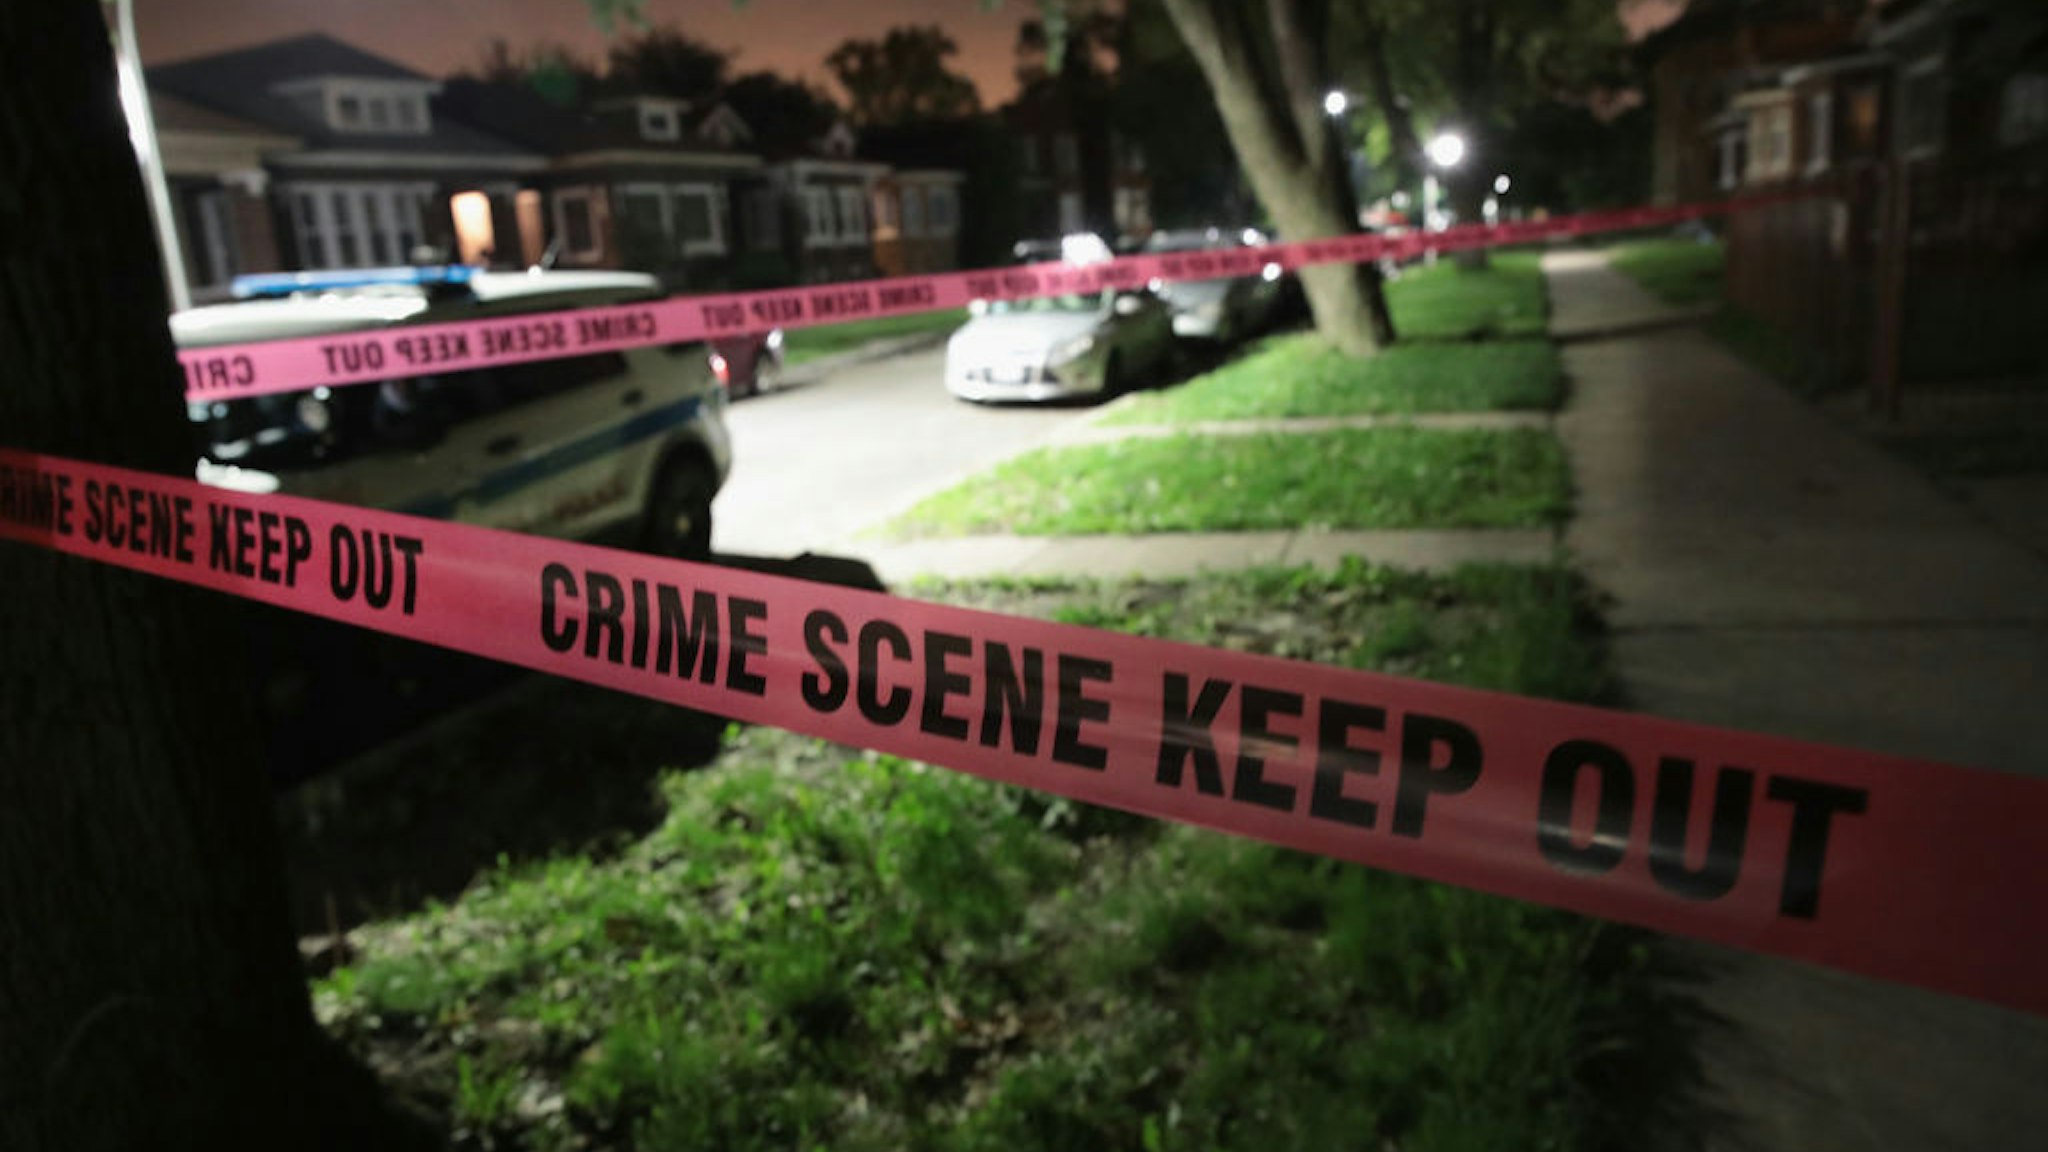 CHICAGO, IL - MAY 27: Crime scene tape is stretched around the front of a home where a man was shot on May 28, 2017 in Chicago, Illinois. Chicago police have added more than 1,000 officers to the streets over the Memorial Day weekend, hoping to put a dent in crime, during what is typically one of the more violent weekends of the year. In 2016, 6 people were killed and another 65 were wounded by gun violence over the Memorial Day weekend. (Photo by Scott Olson/Getty Images)